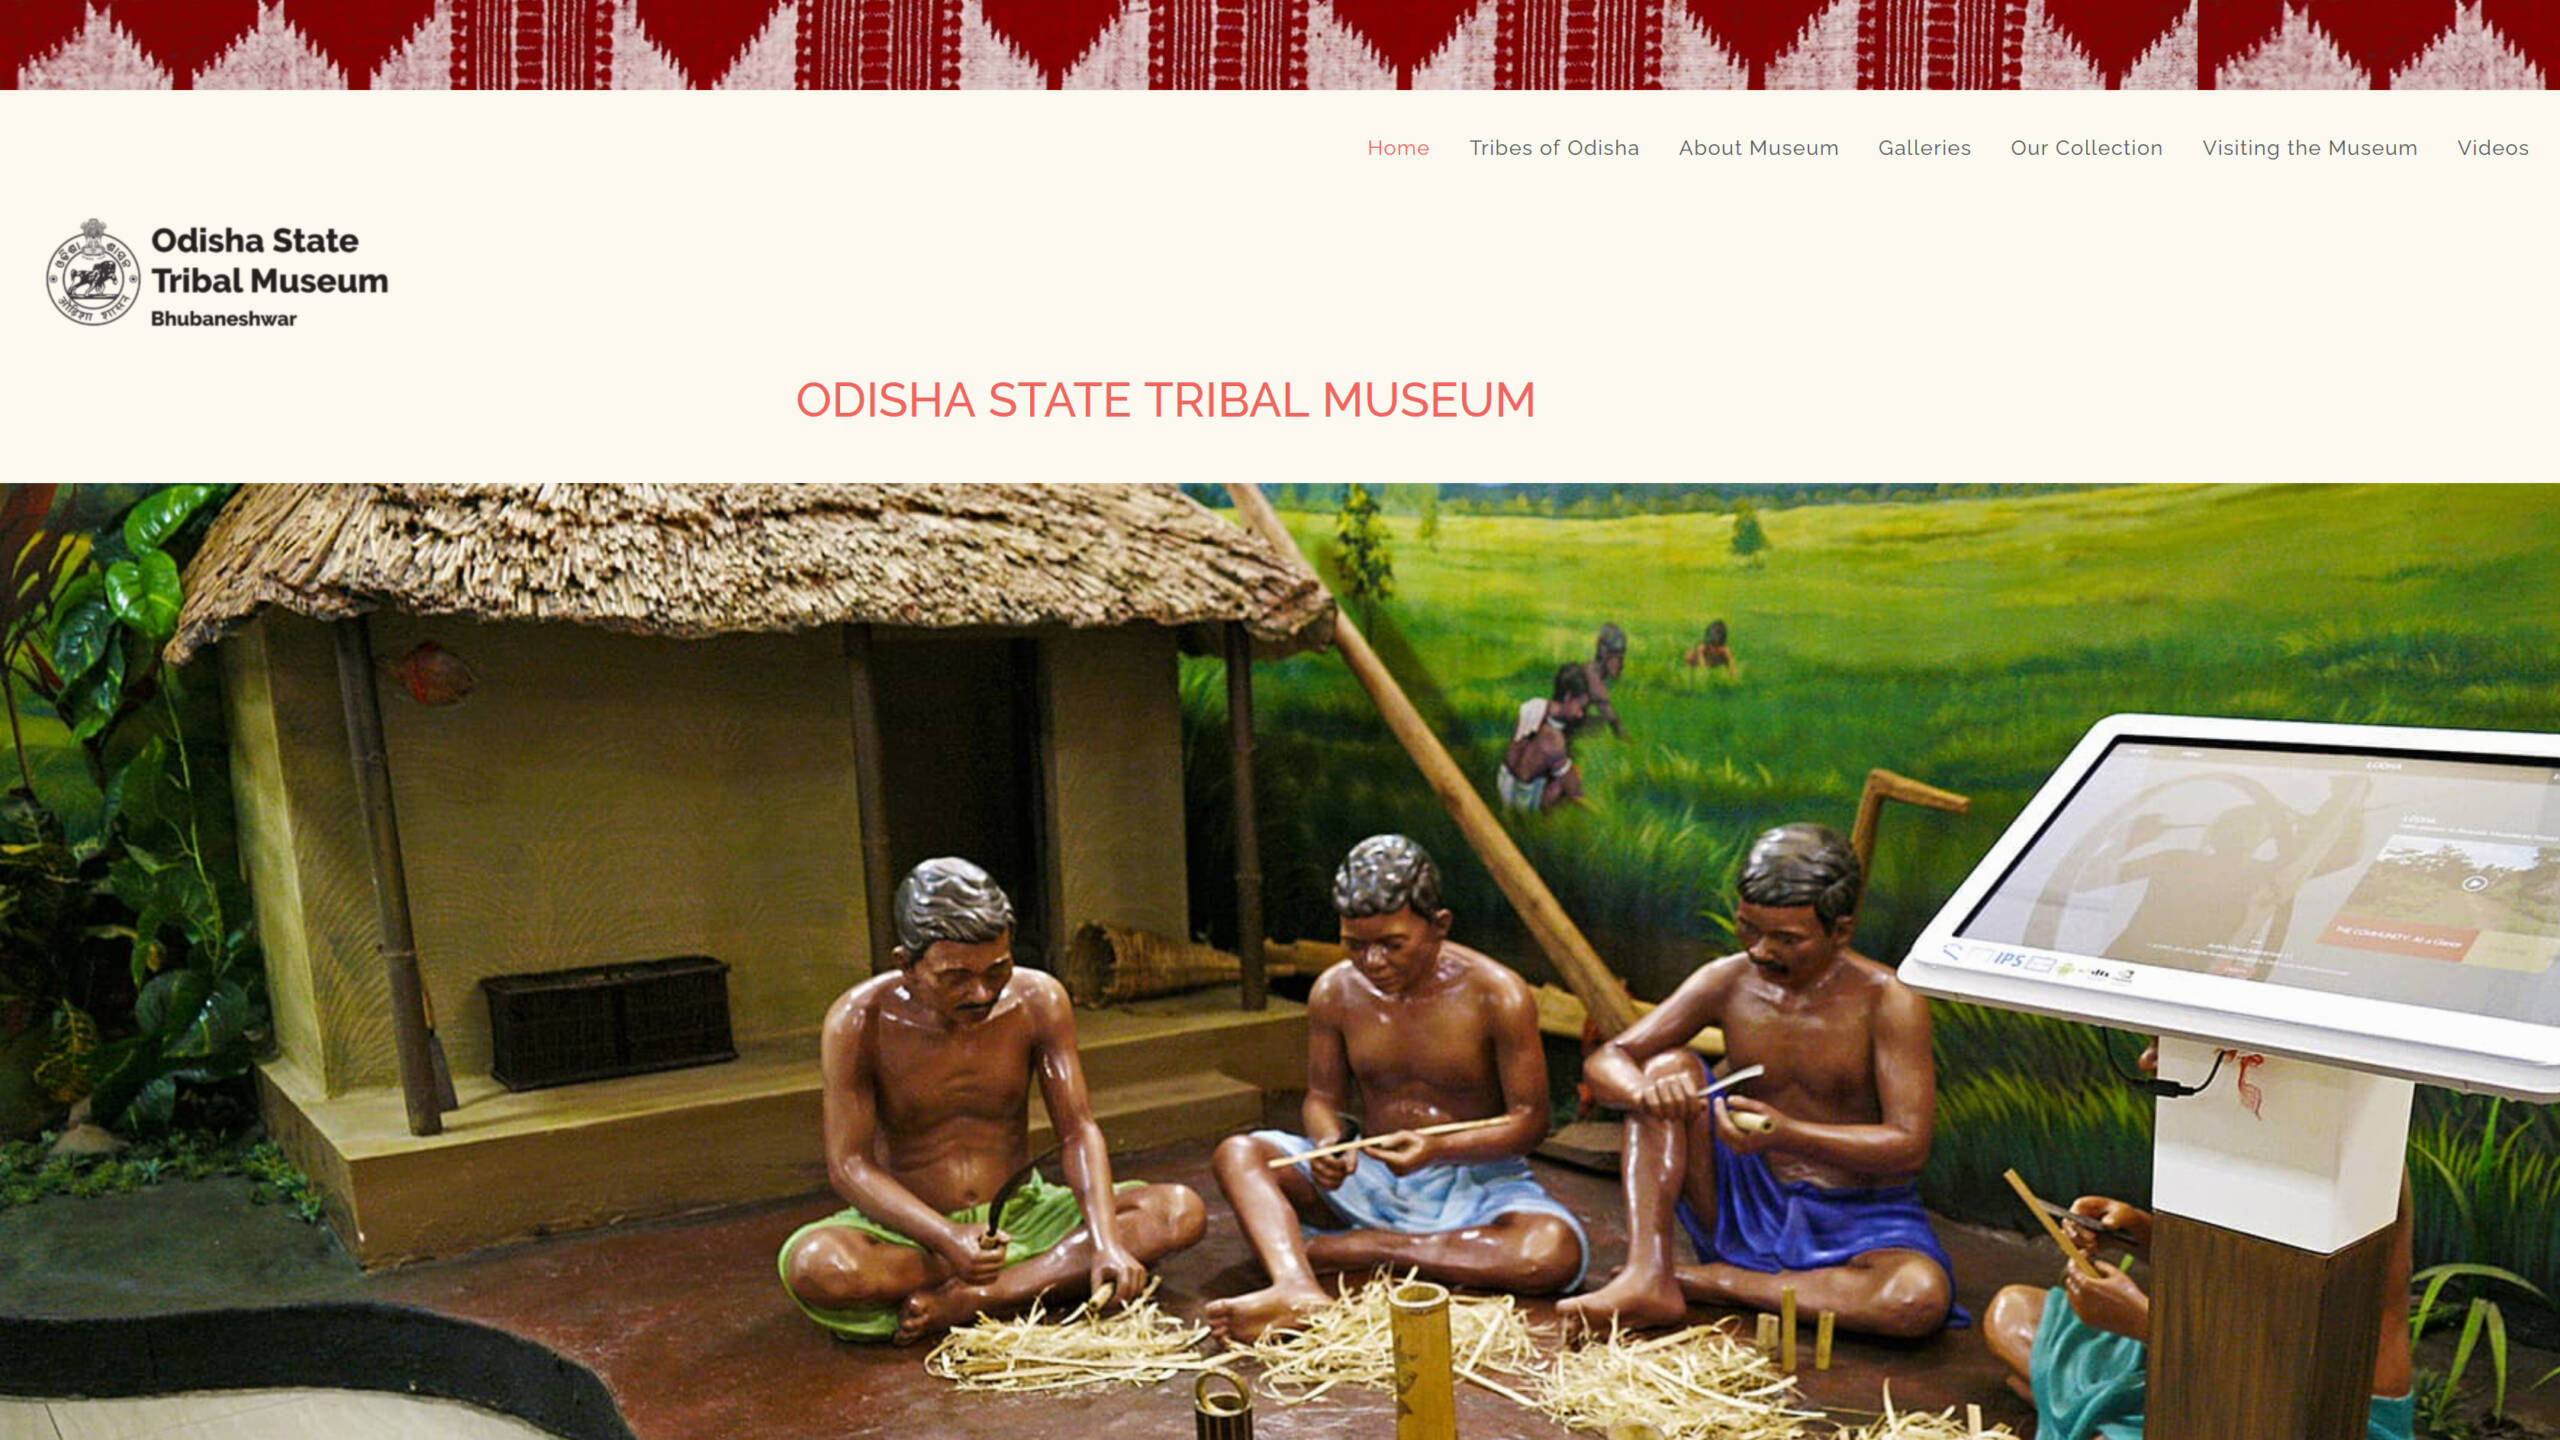 Home page of the website of Odisha State Tribal Museum